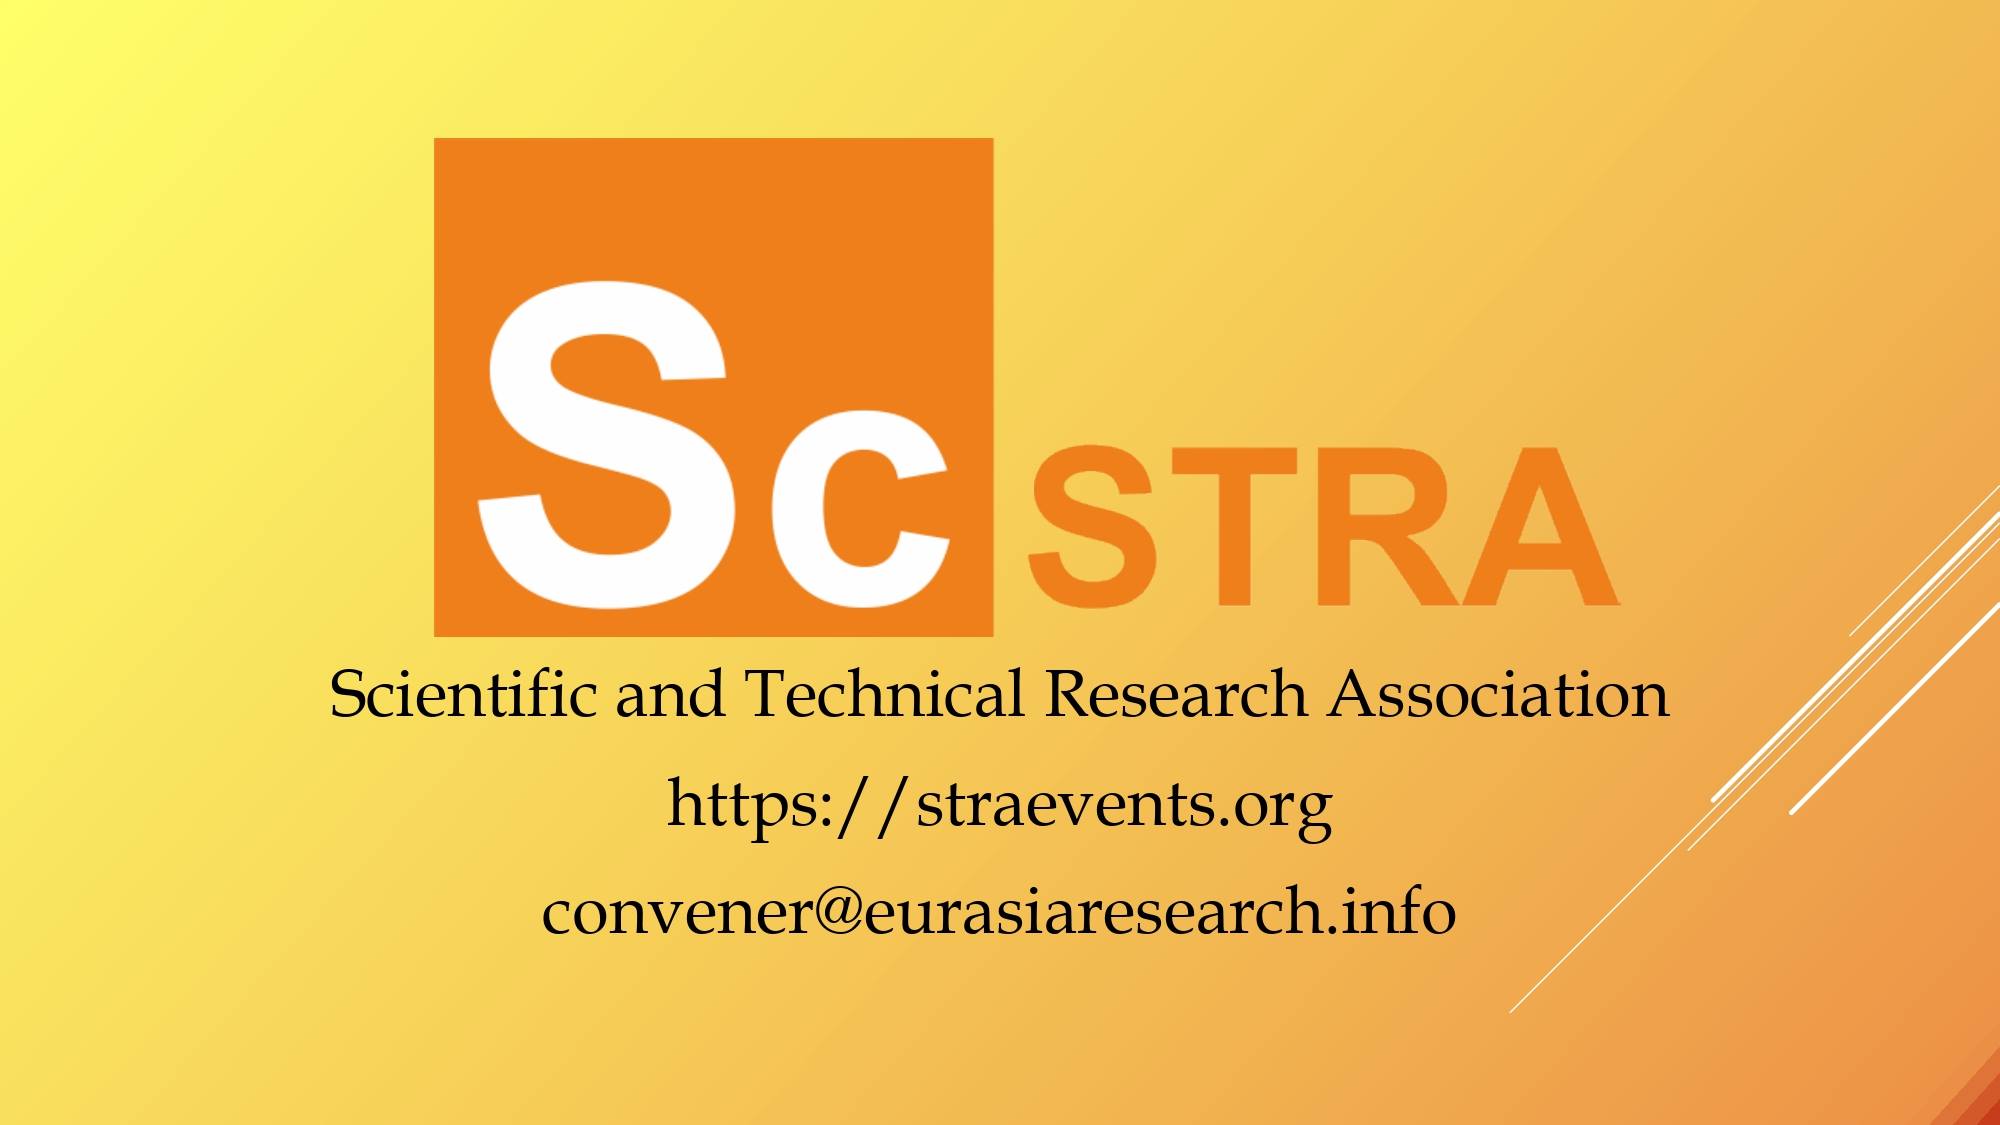 4th ICSTR Budapest – International Conference on Science & Technology Research, 16-17 July 2021, Budapest, Hungary